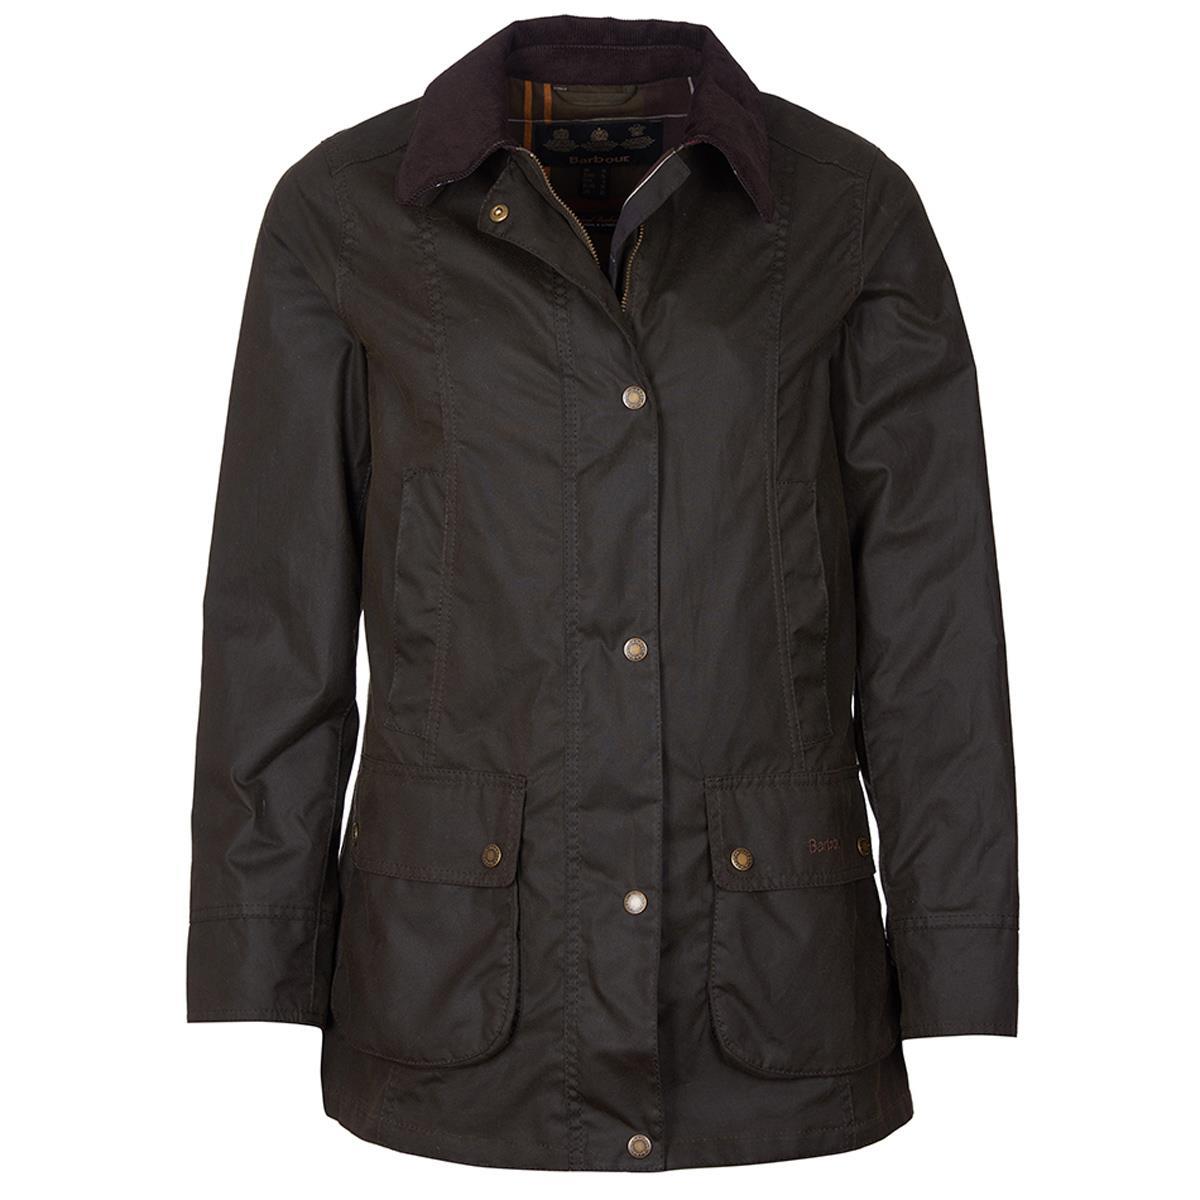 What is the PM Reference for the Barbour Fiddich Women's Wax Jacket?